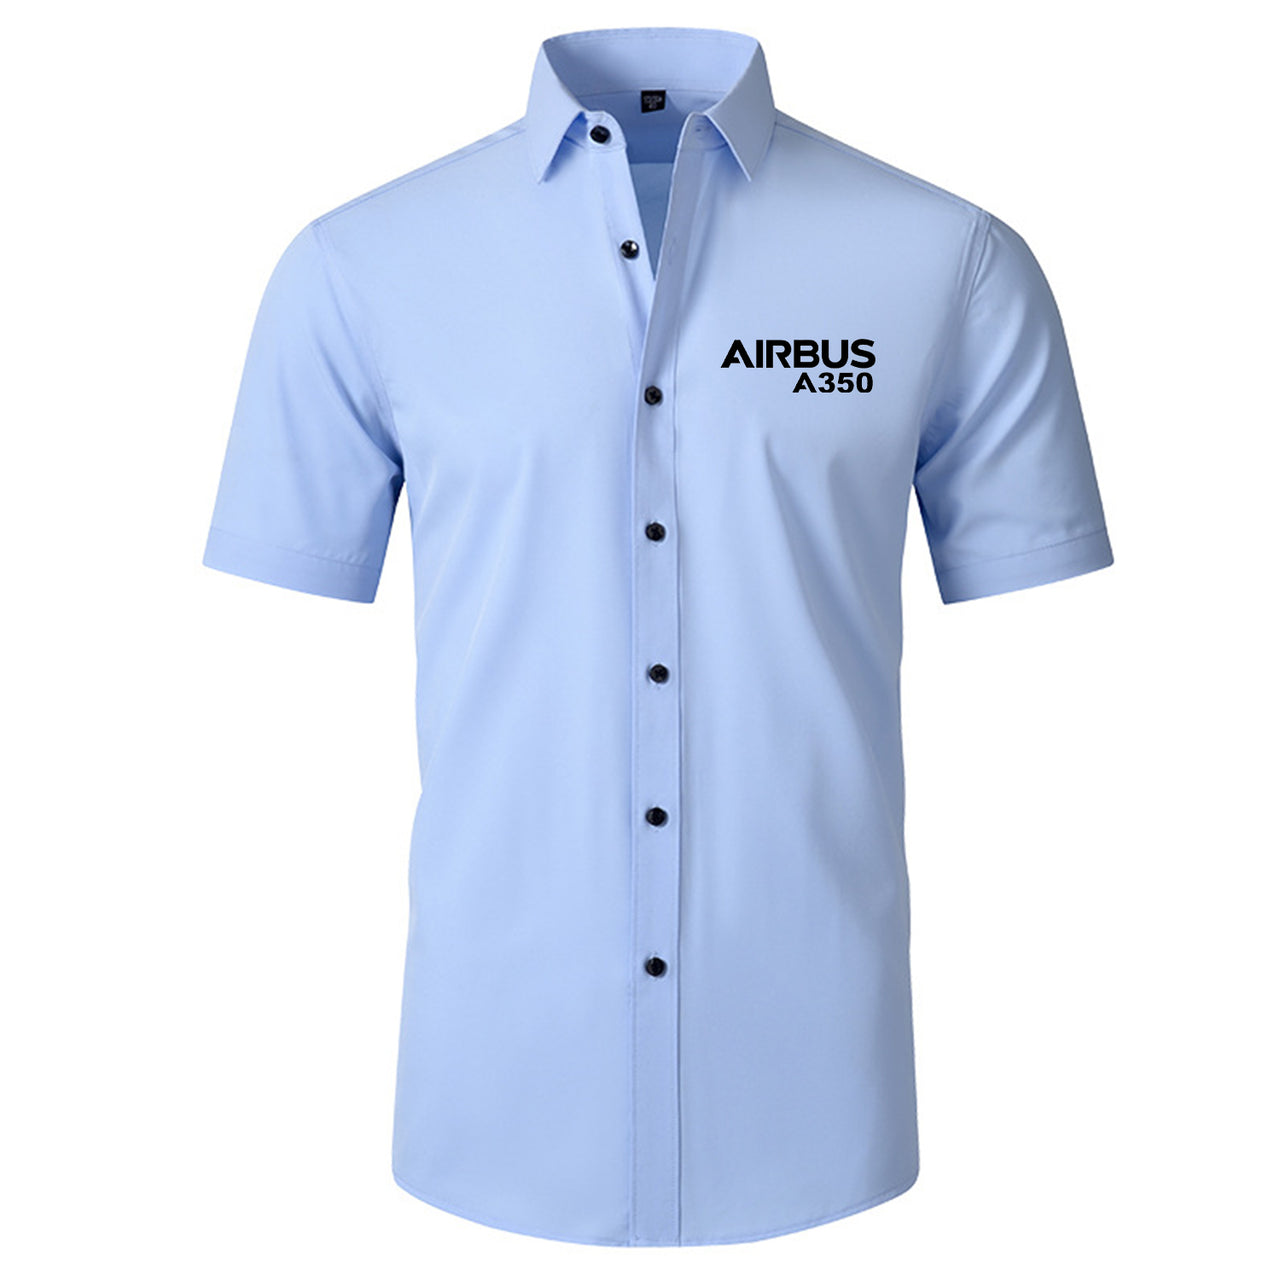 Airbus A350 & Text Designed Short Sleeve Shirts